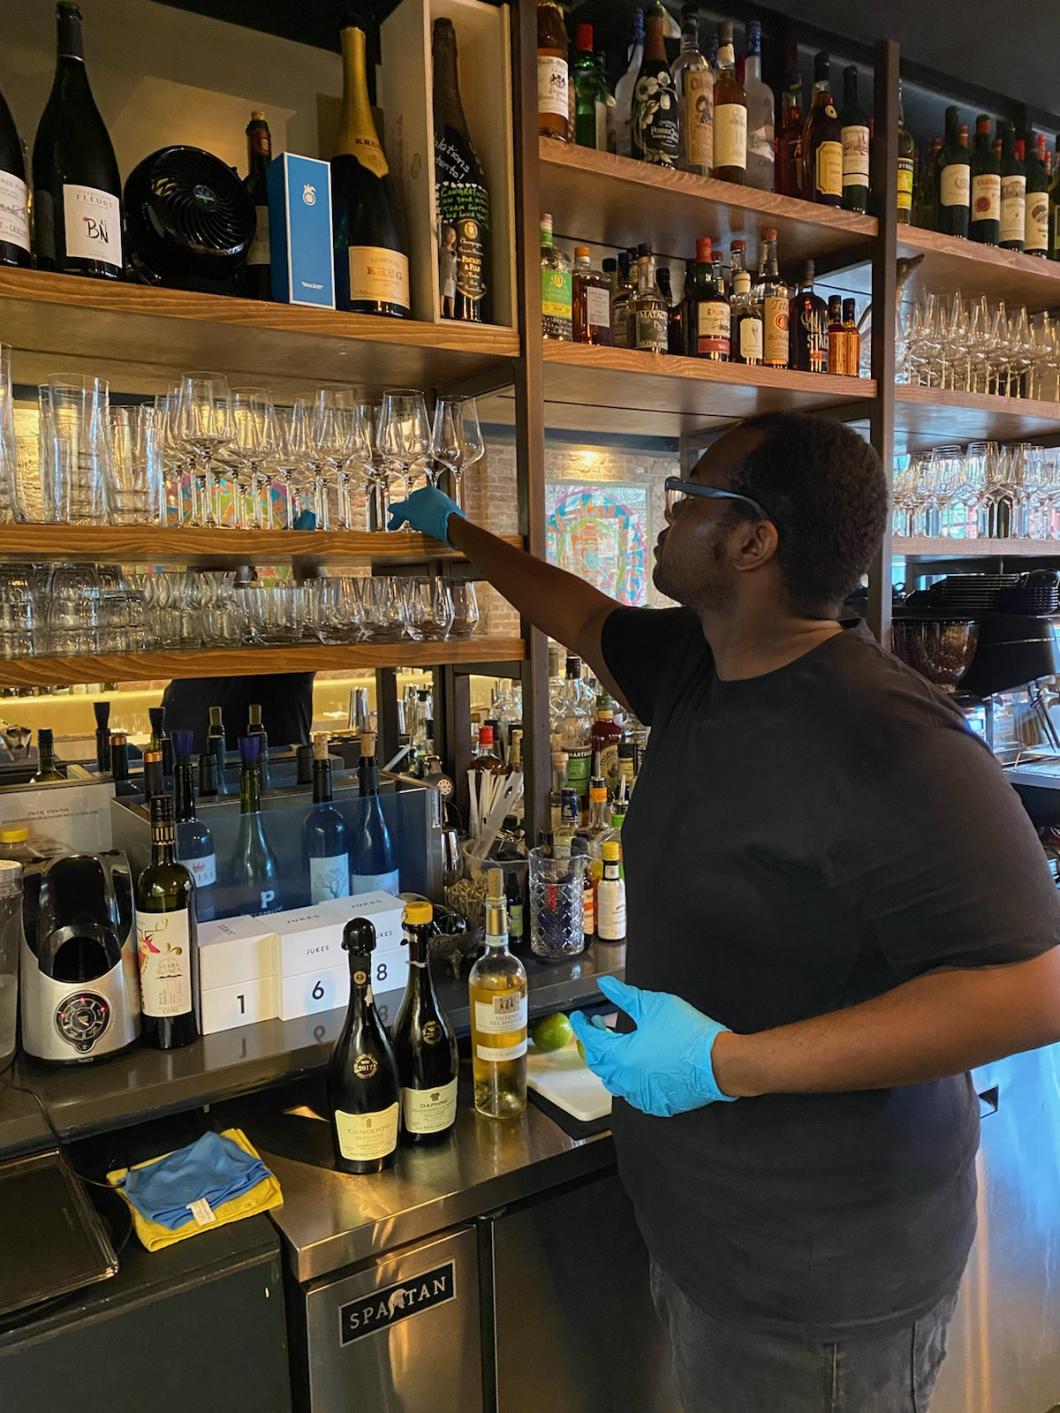 Jawann is placing a clean wine glass on a shelf. There are several bottles and glasses on the shelf.